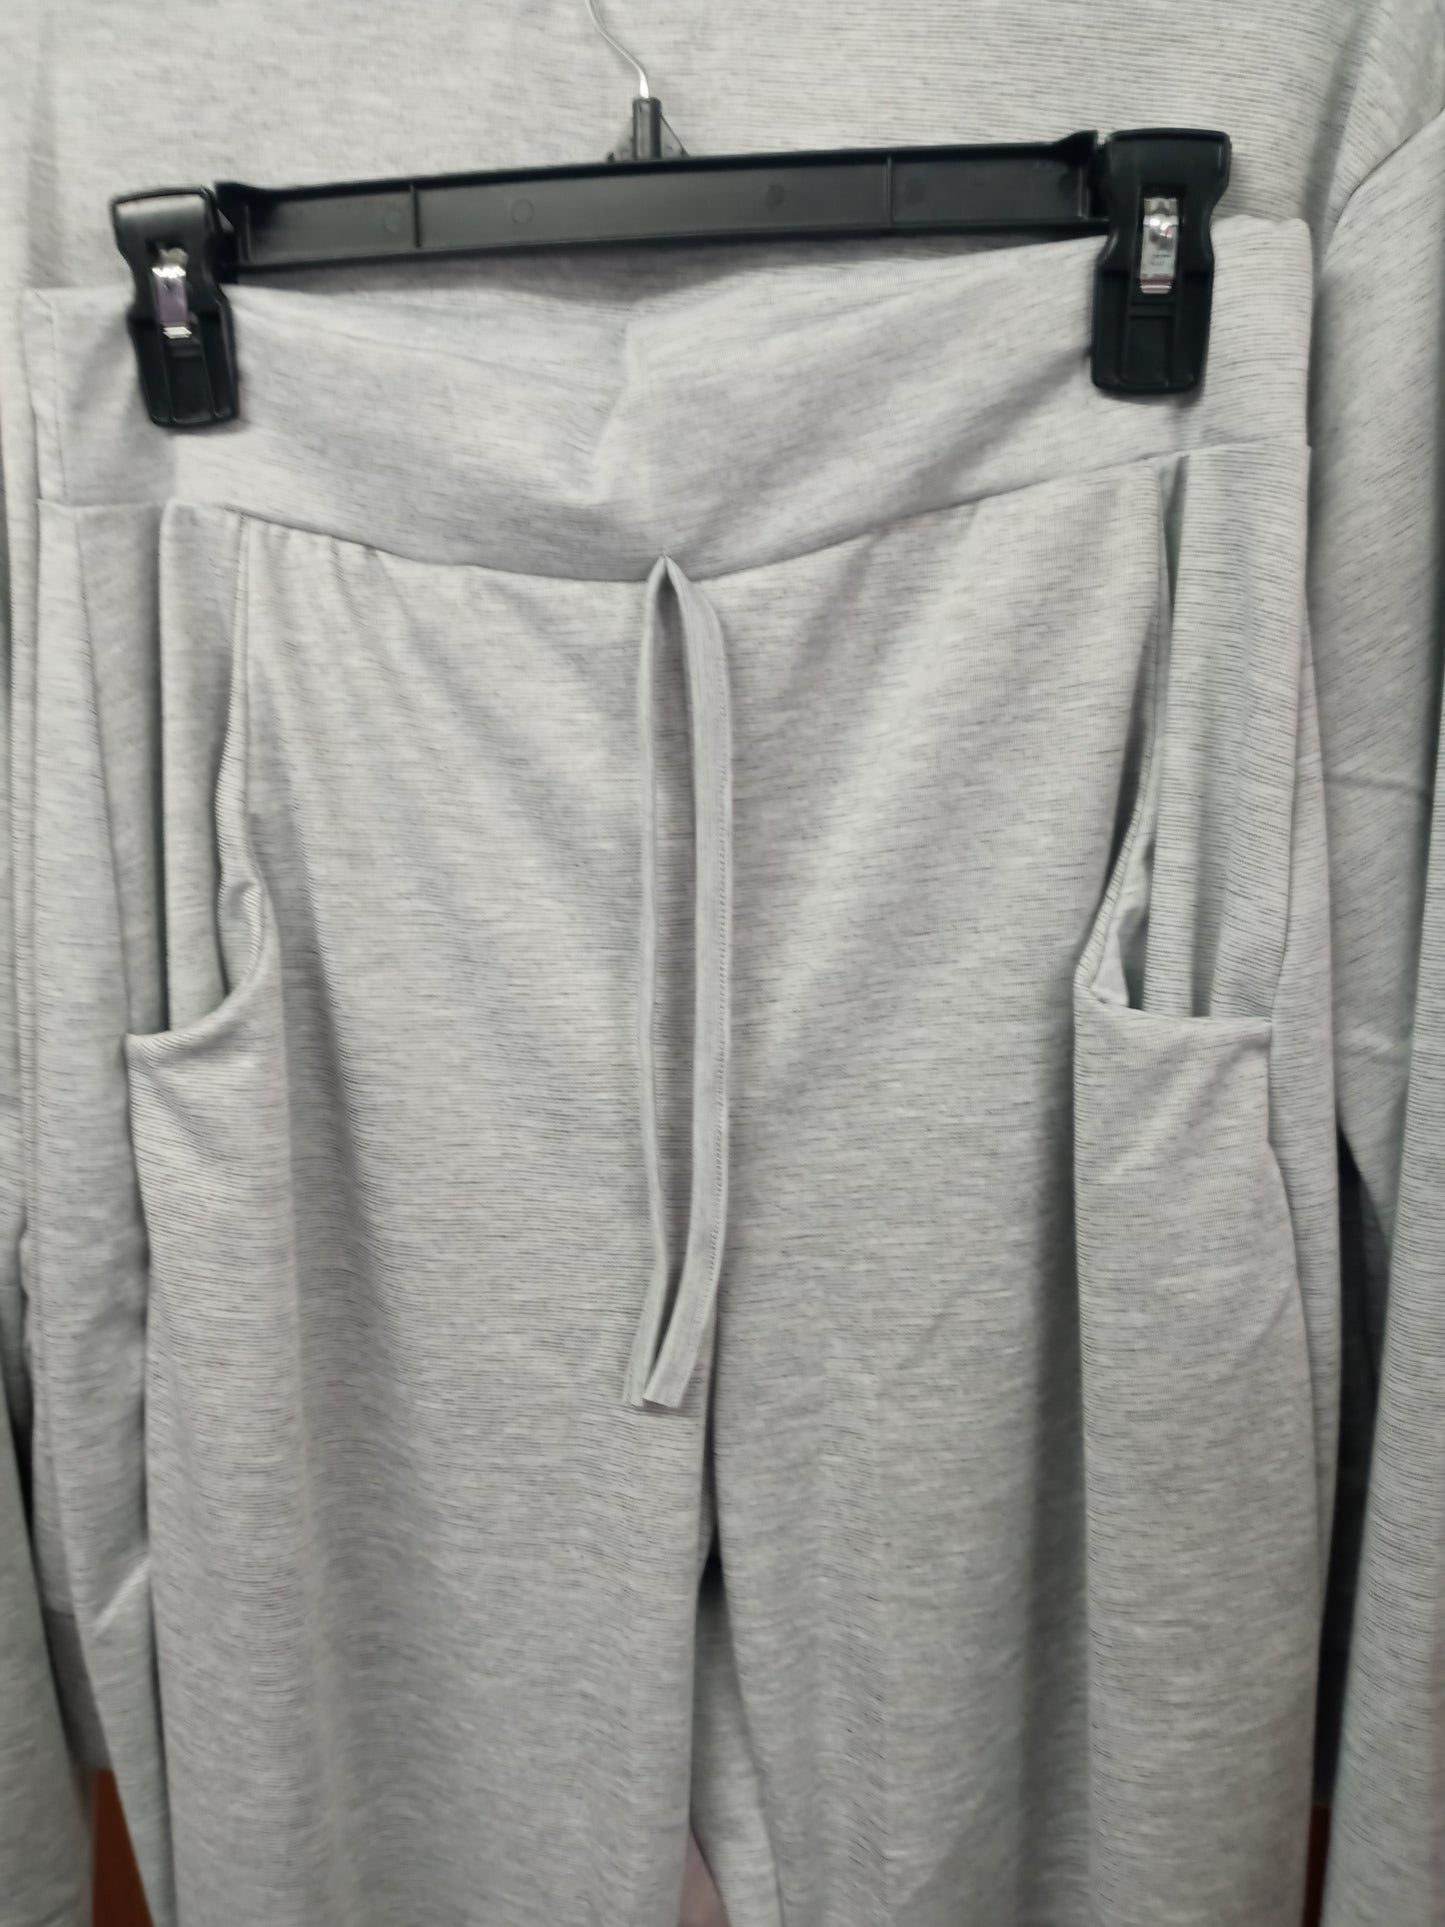 Woman 2 Piece Jogger Set By: Miss Blush Size 14 Color Gray/Blk Logo "Vogue" New Fall Arrival